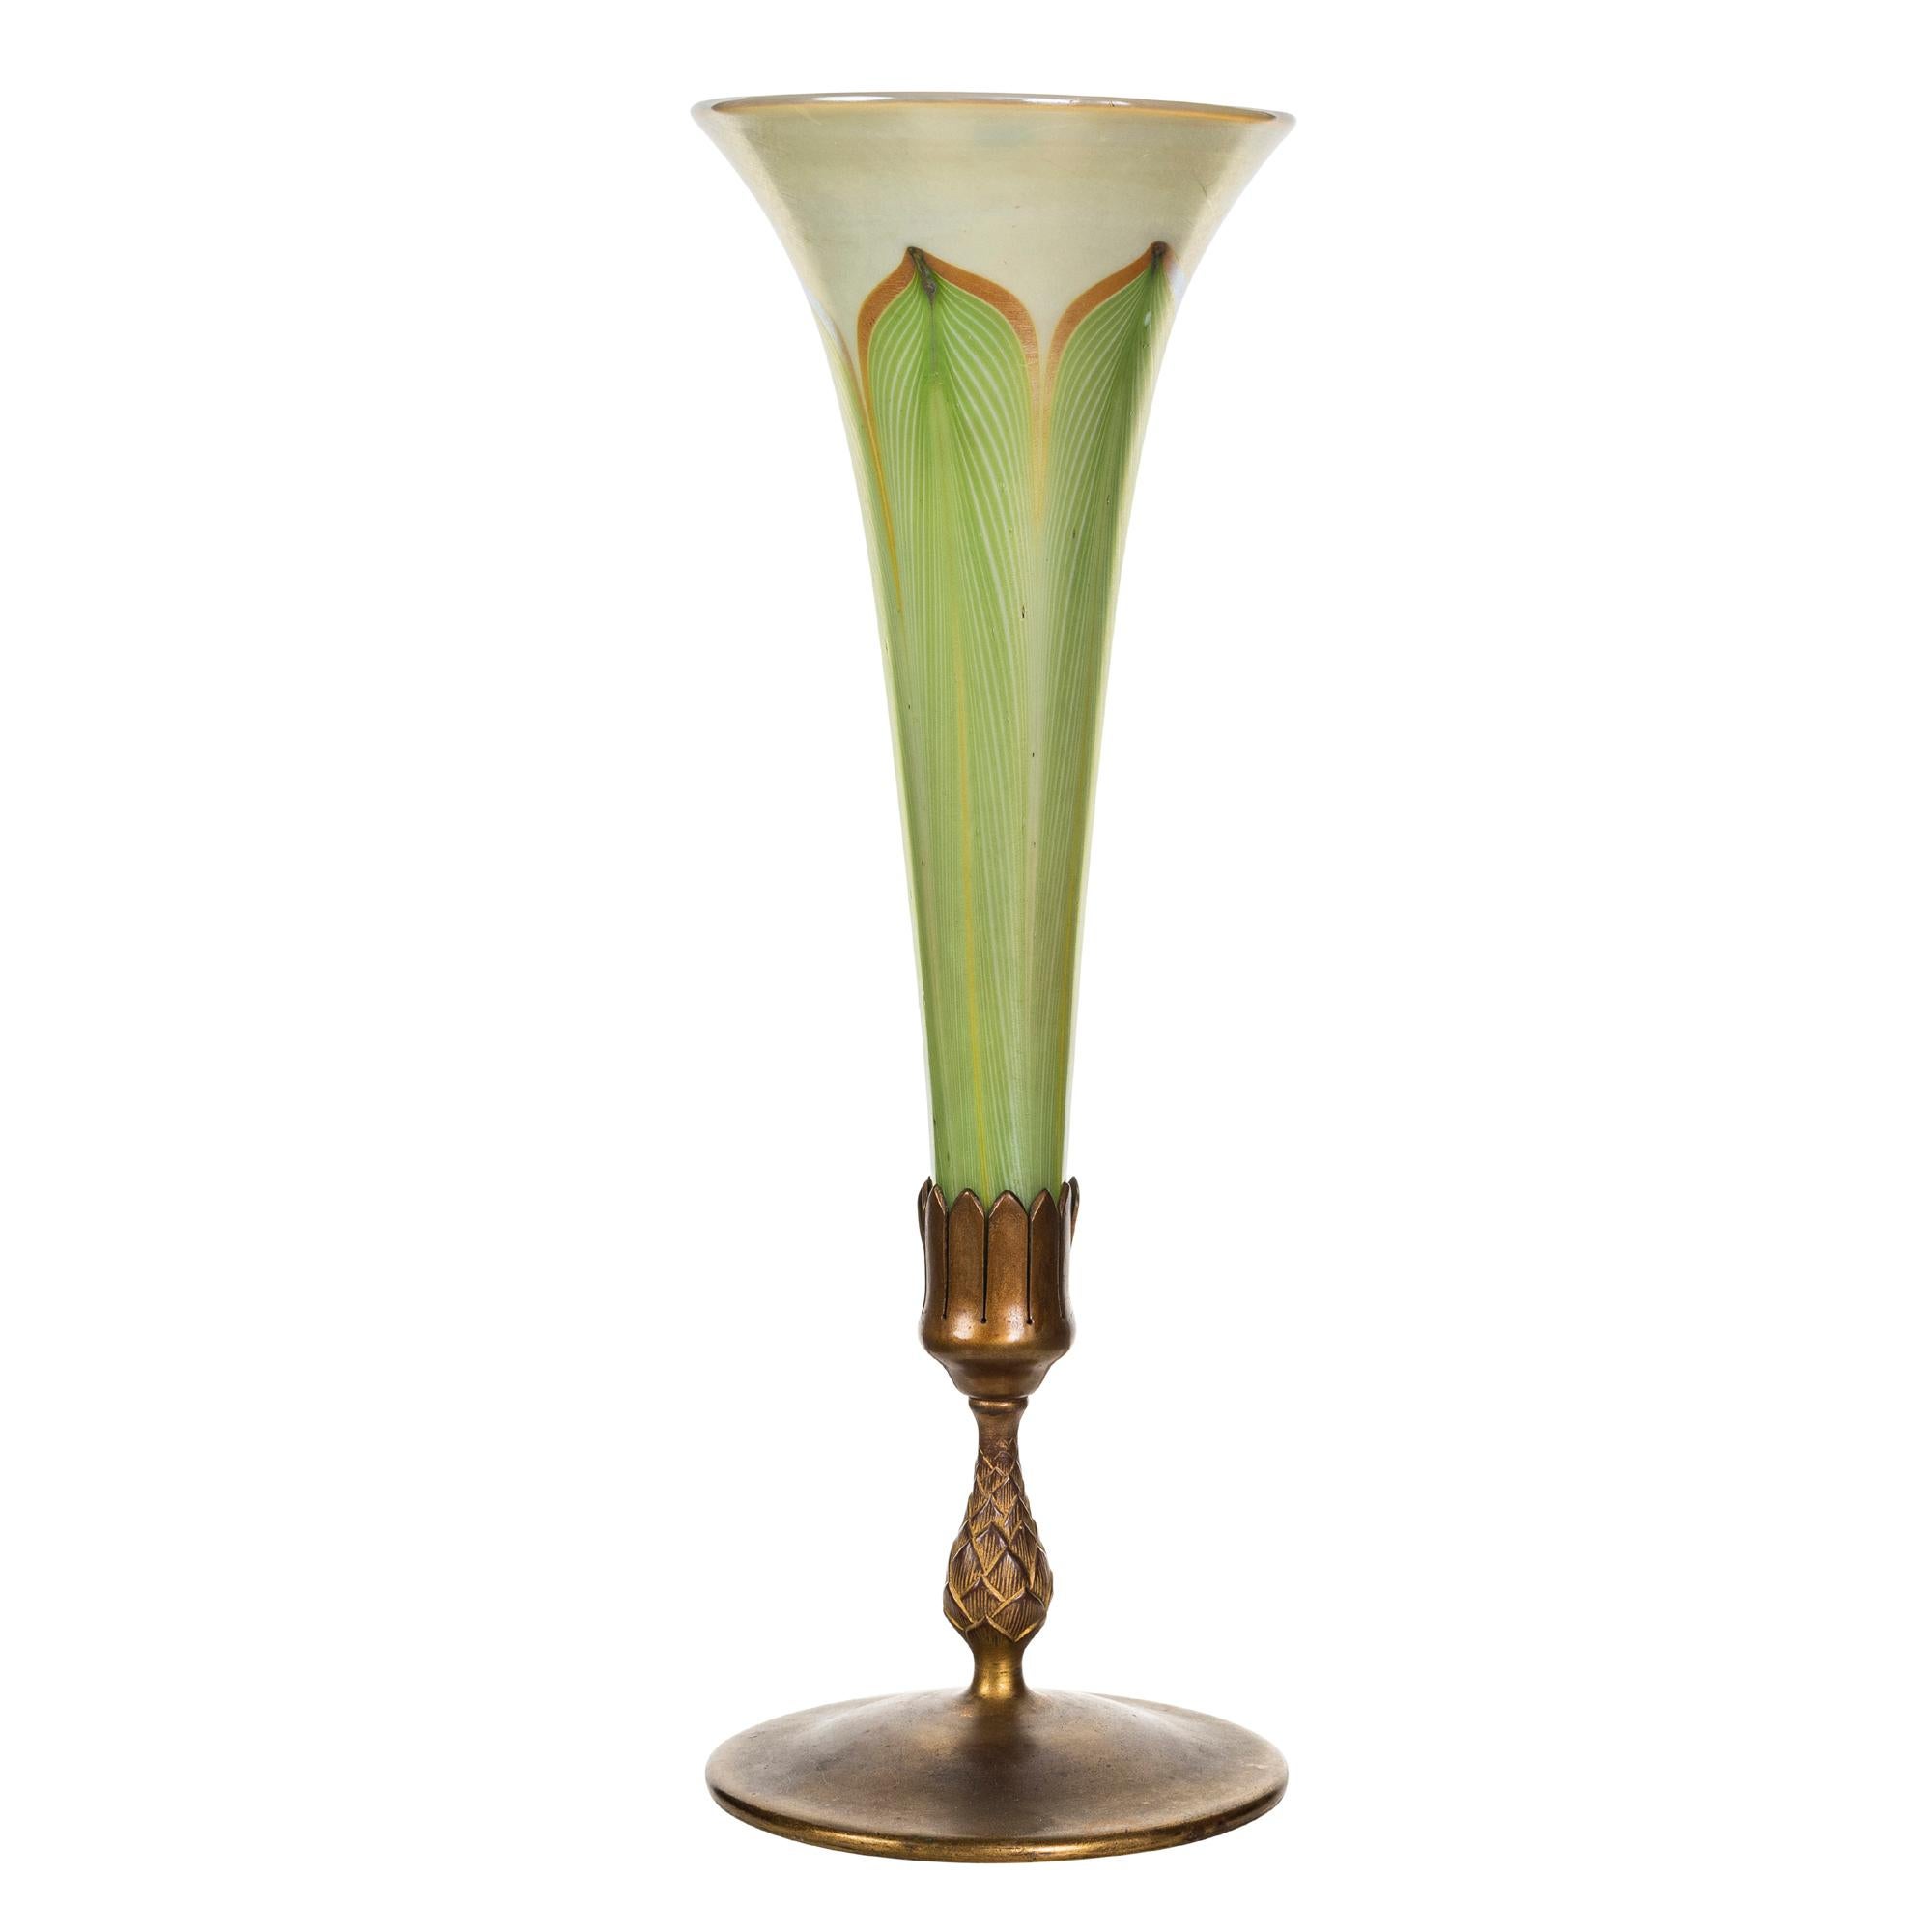 Tiffany Studios circa 1900 Fine Decorated Gilt-Bronze and Tiffany Favrile Glass In Good Condition For Sale In West Palm Beach, FL